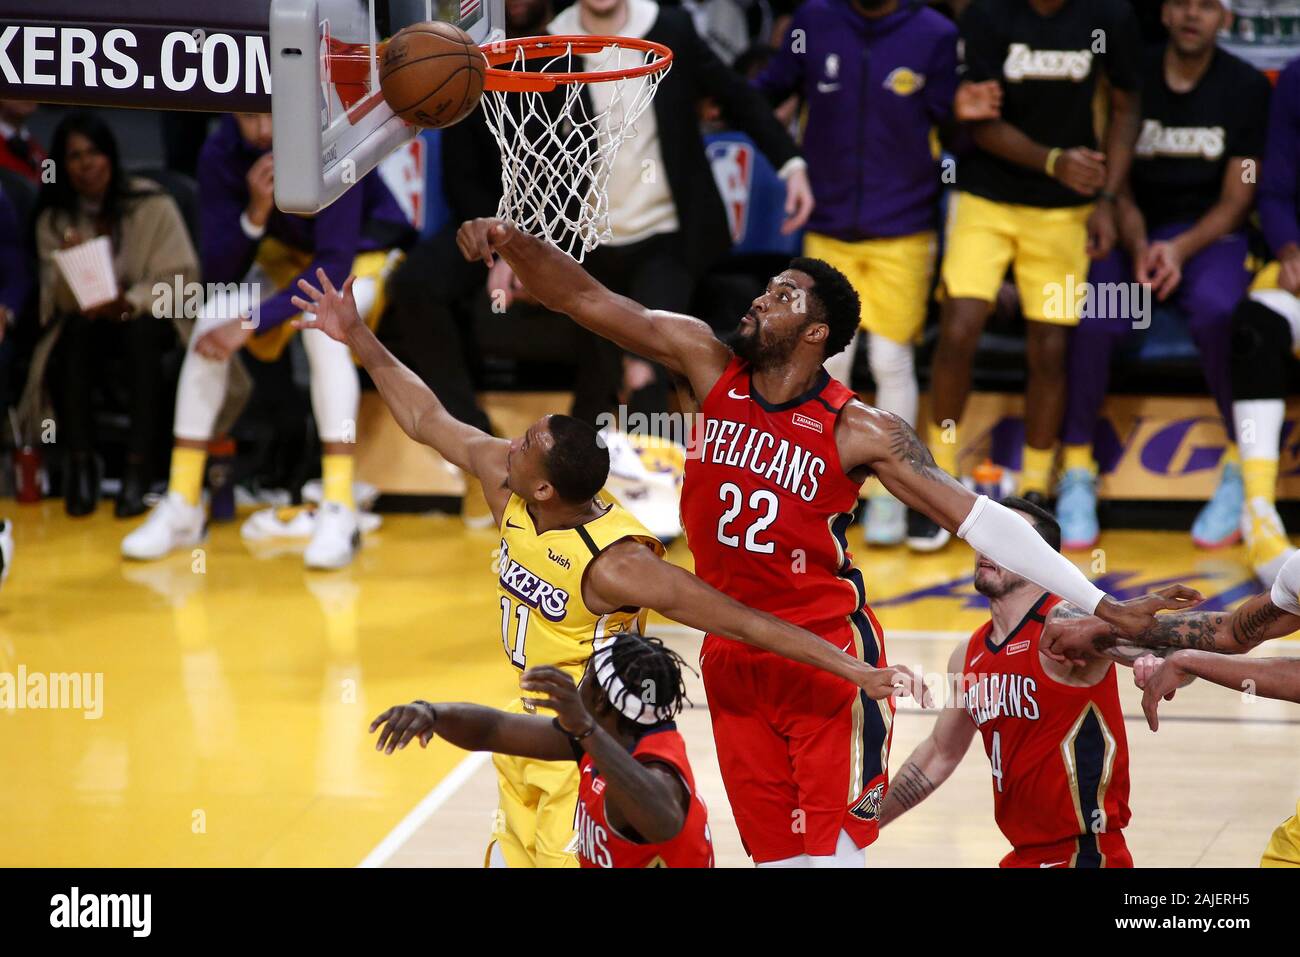 Los Angeles, California, USA. 3rd Jan, 2020. New Orleans Pelicans' Derrick Favors (22) blocks a shot by Los Angeles Lakers' Avery Bradley (11) during an NBA basketball game between Los Angeles Lakers and New Orleans Pelicans, Friday, Jan. 3, 2020, in Los Angeles. Credit: Ringo Chiu/ZUMA Wire/Alamy Live News Stock Photo